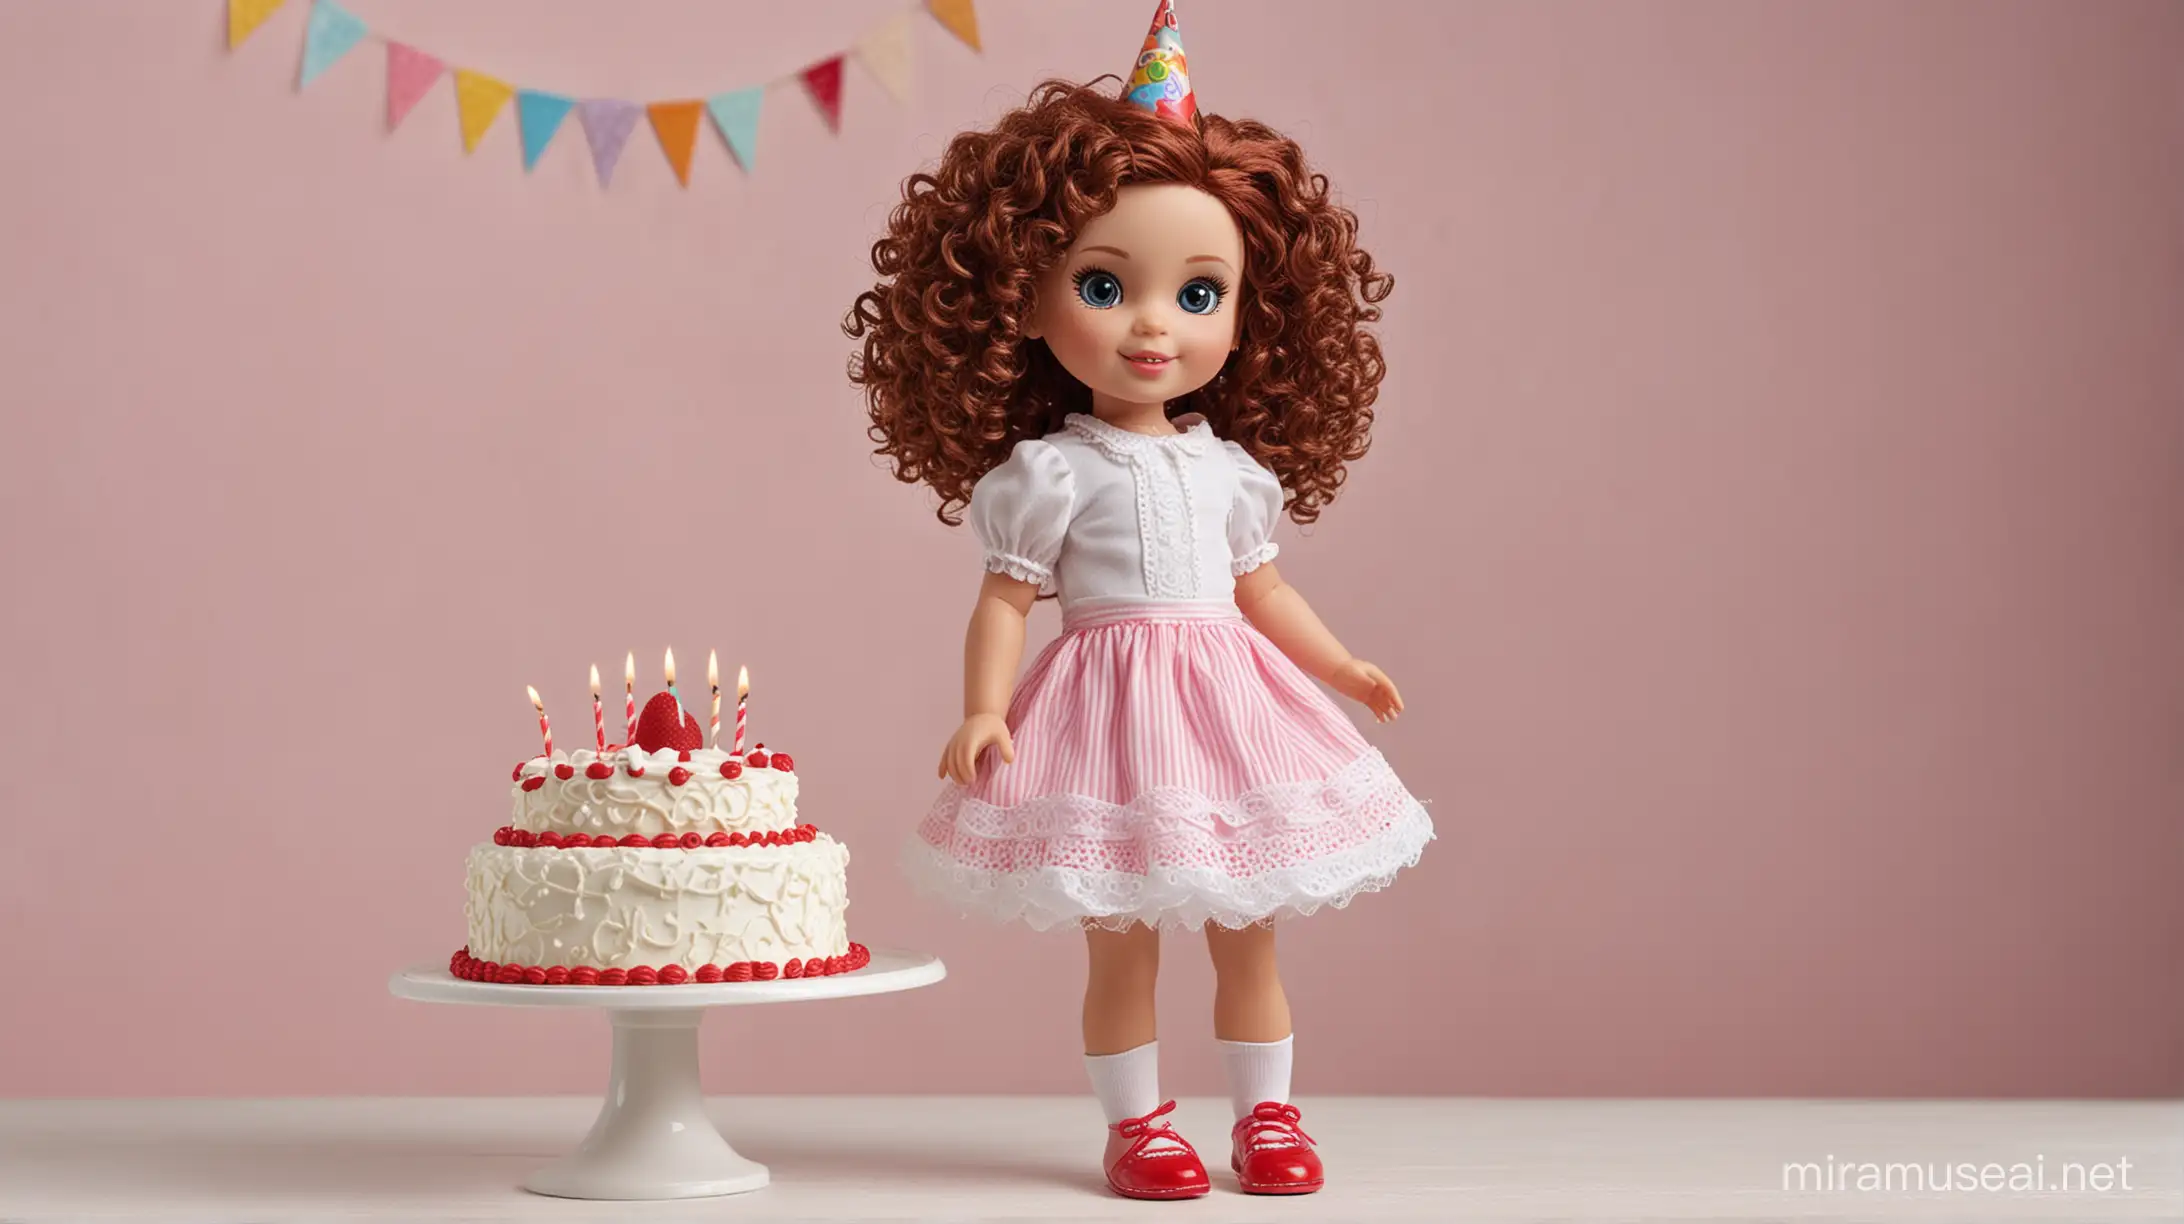 full image of a doll, tall curly hair , wearing red shoes holding a birthday cake, mouth opened